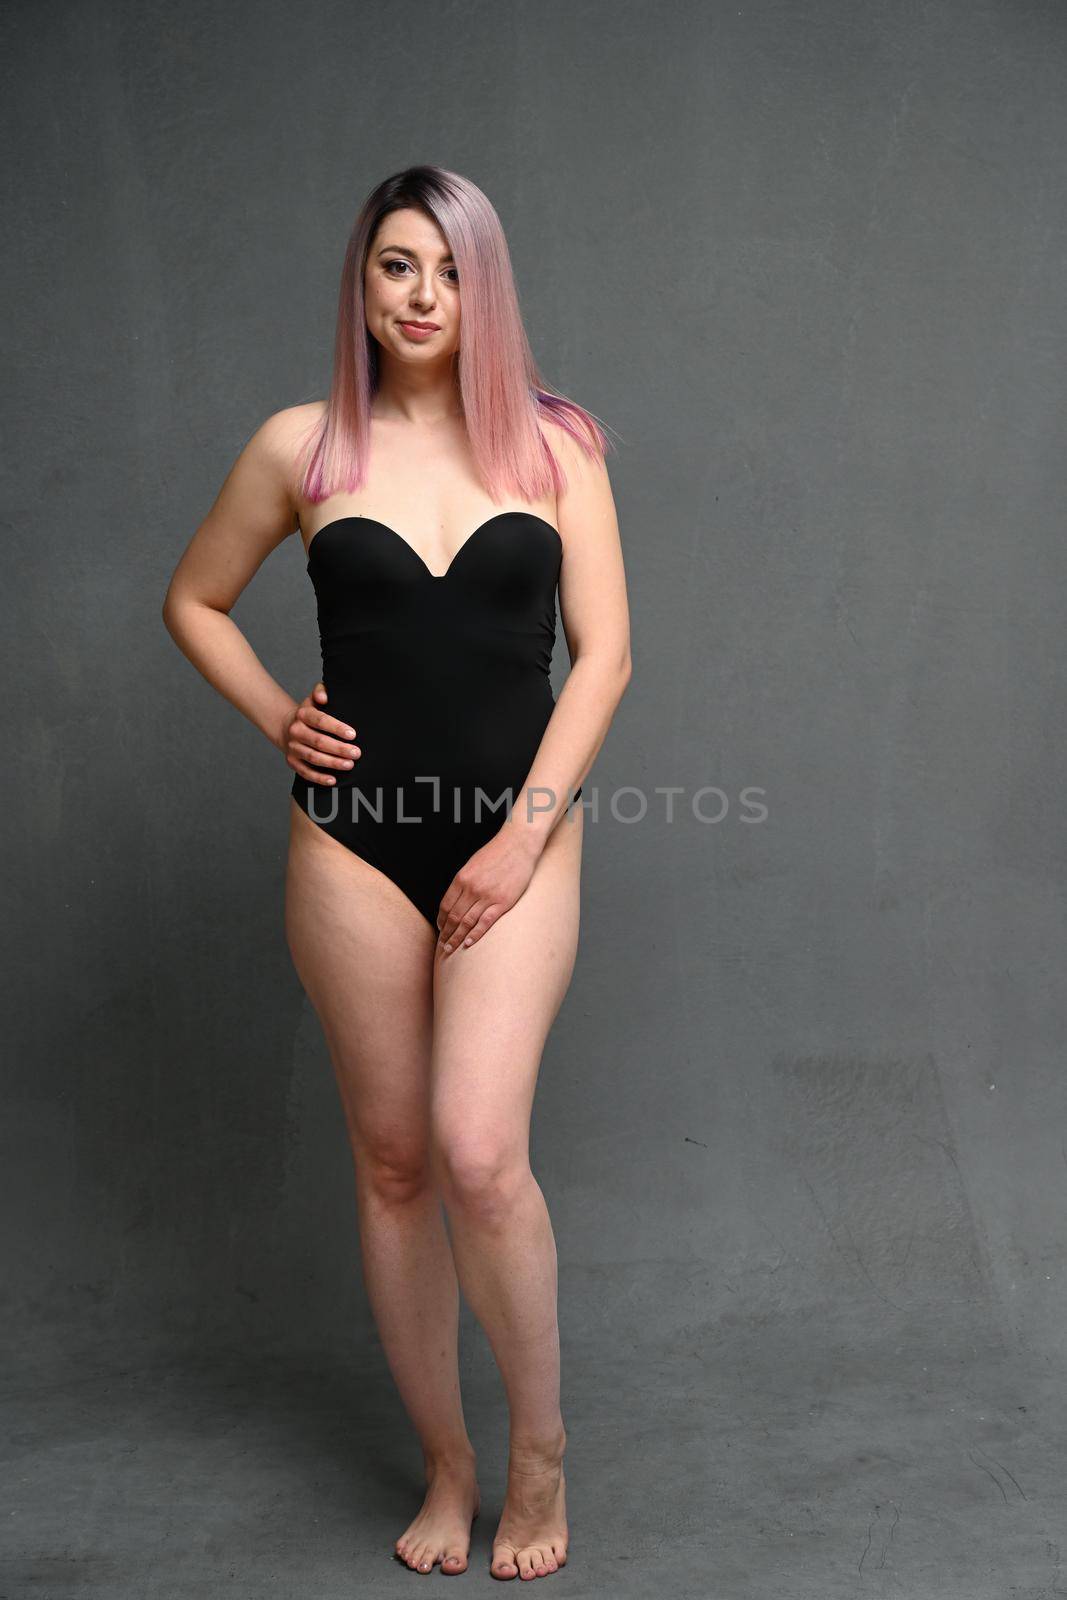 Pretty adult woman in full length in bodysuit looking directly at the camera